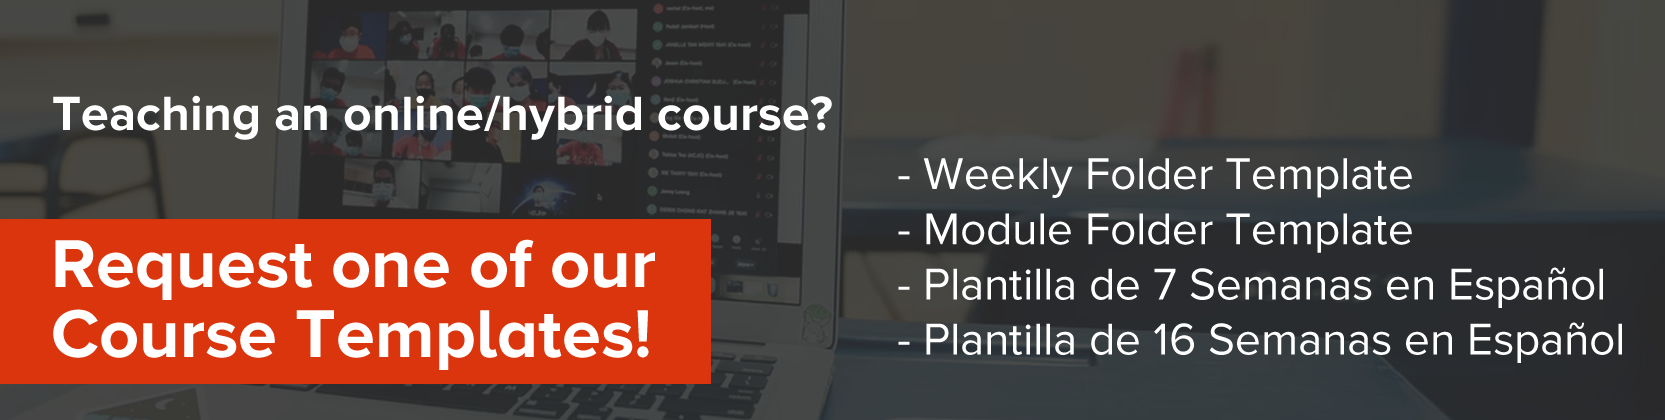 Request a Course Template Page Banner 